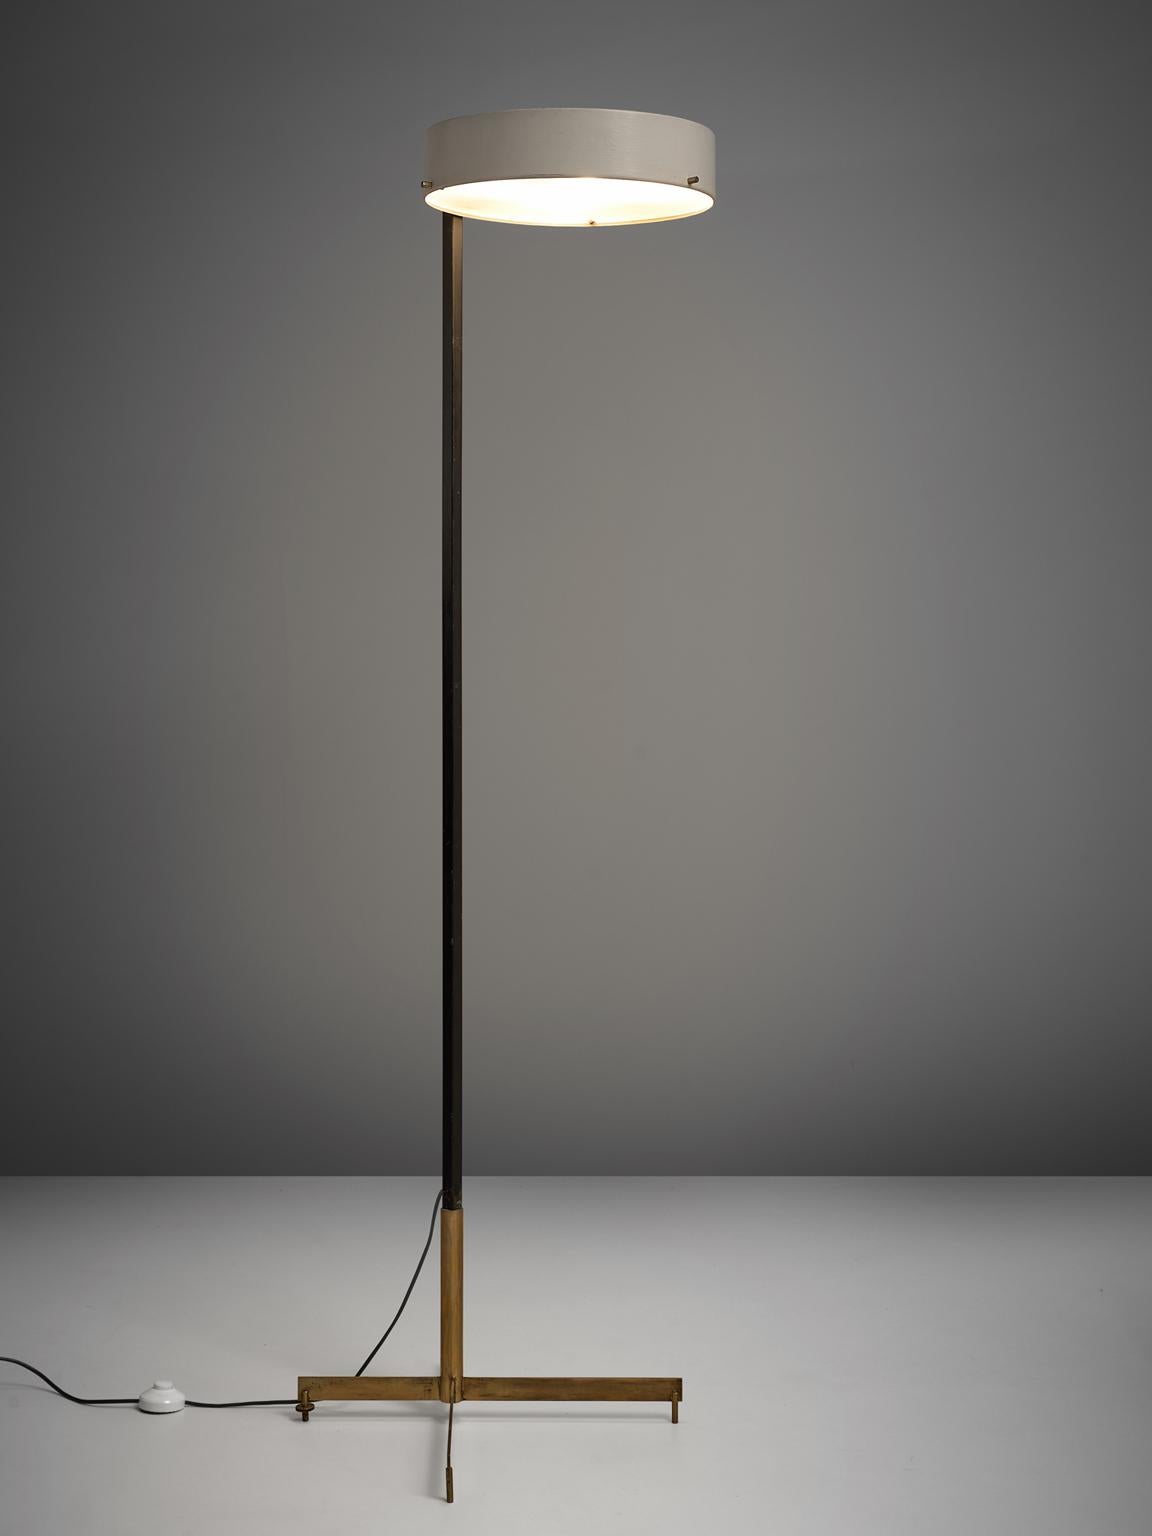 Bruno Gatta for Stilnovo, floor lamp, brass, metal, Italy, 1950.

This slim floor lamp with lacquered aluminium stem and a brass base is designed by Bruno Gatta for Stilnovo. The brass has a beautiful patina, which can only be gained after years